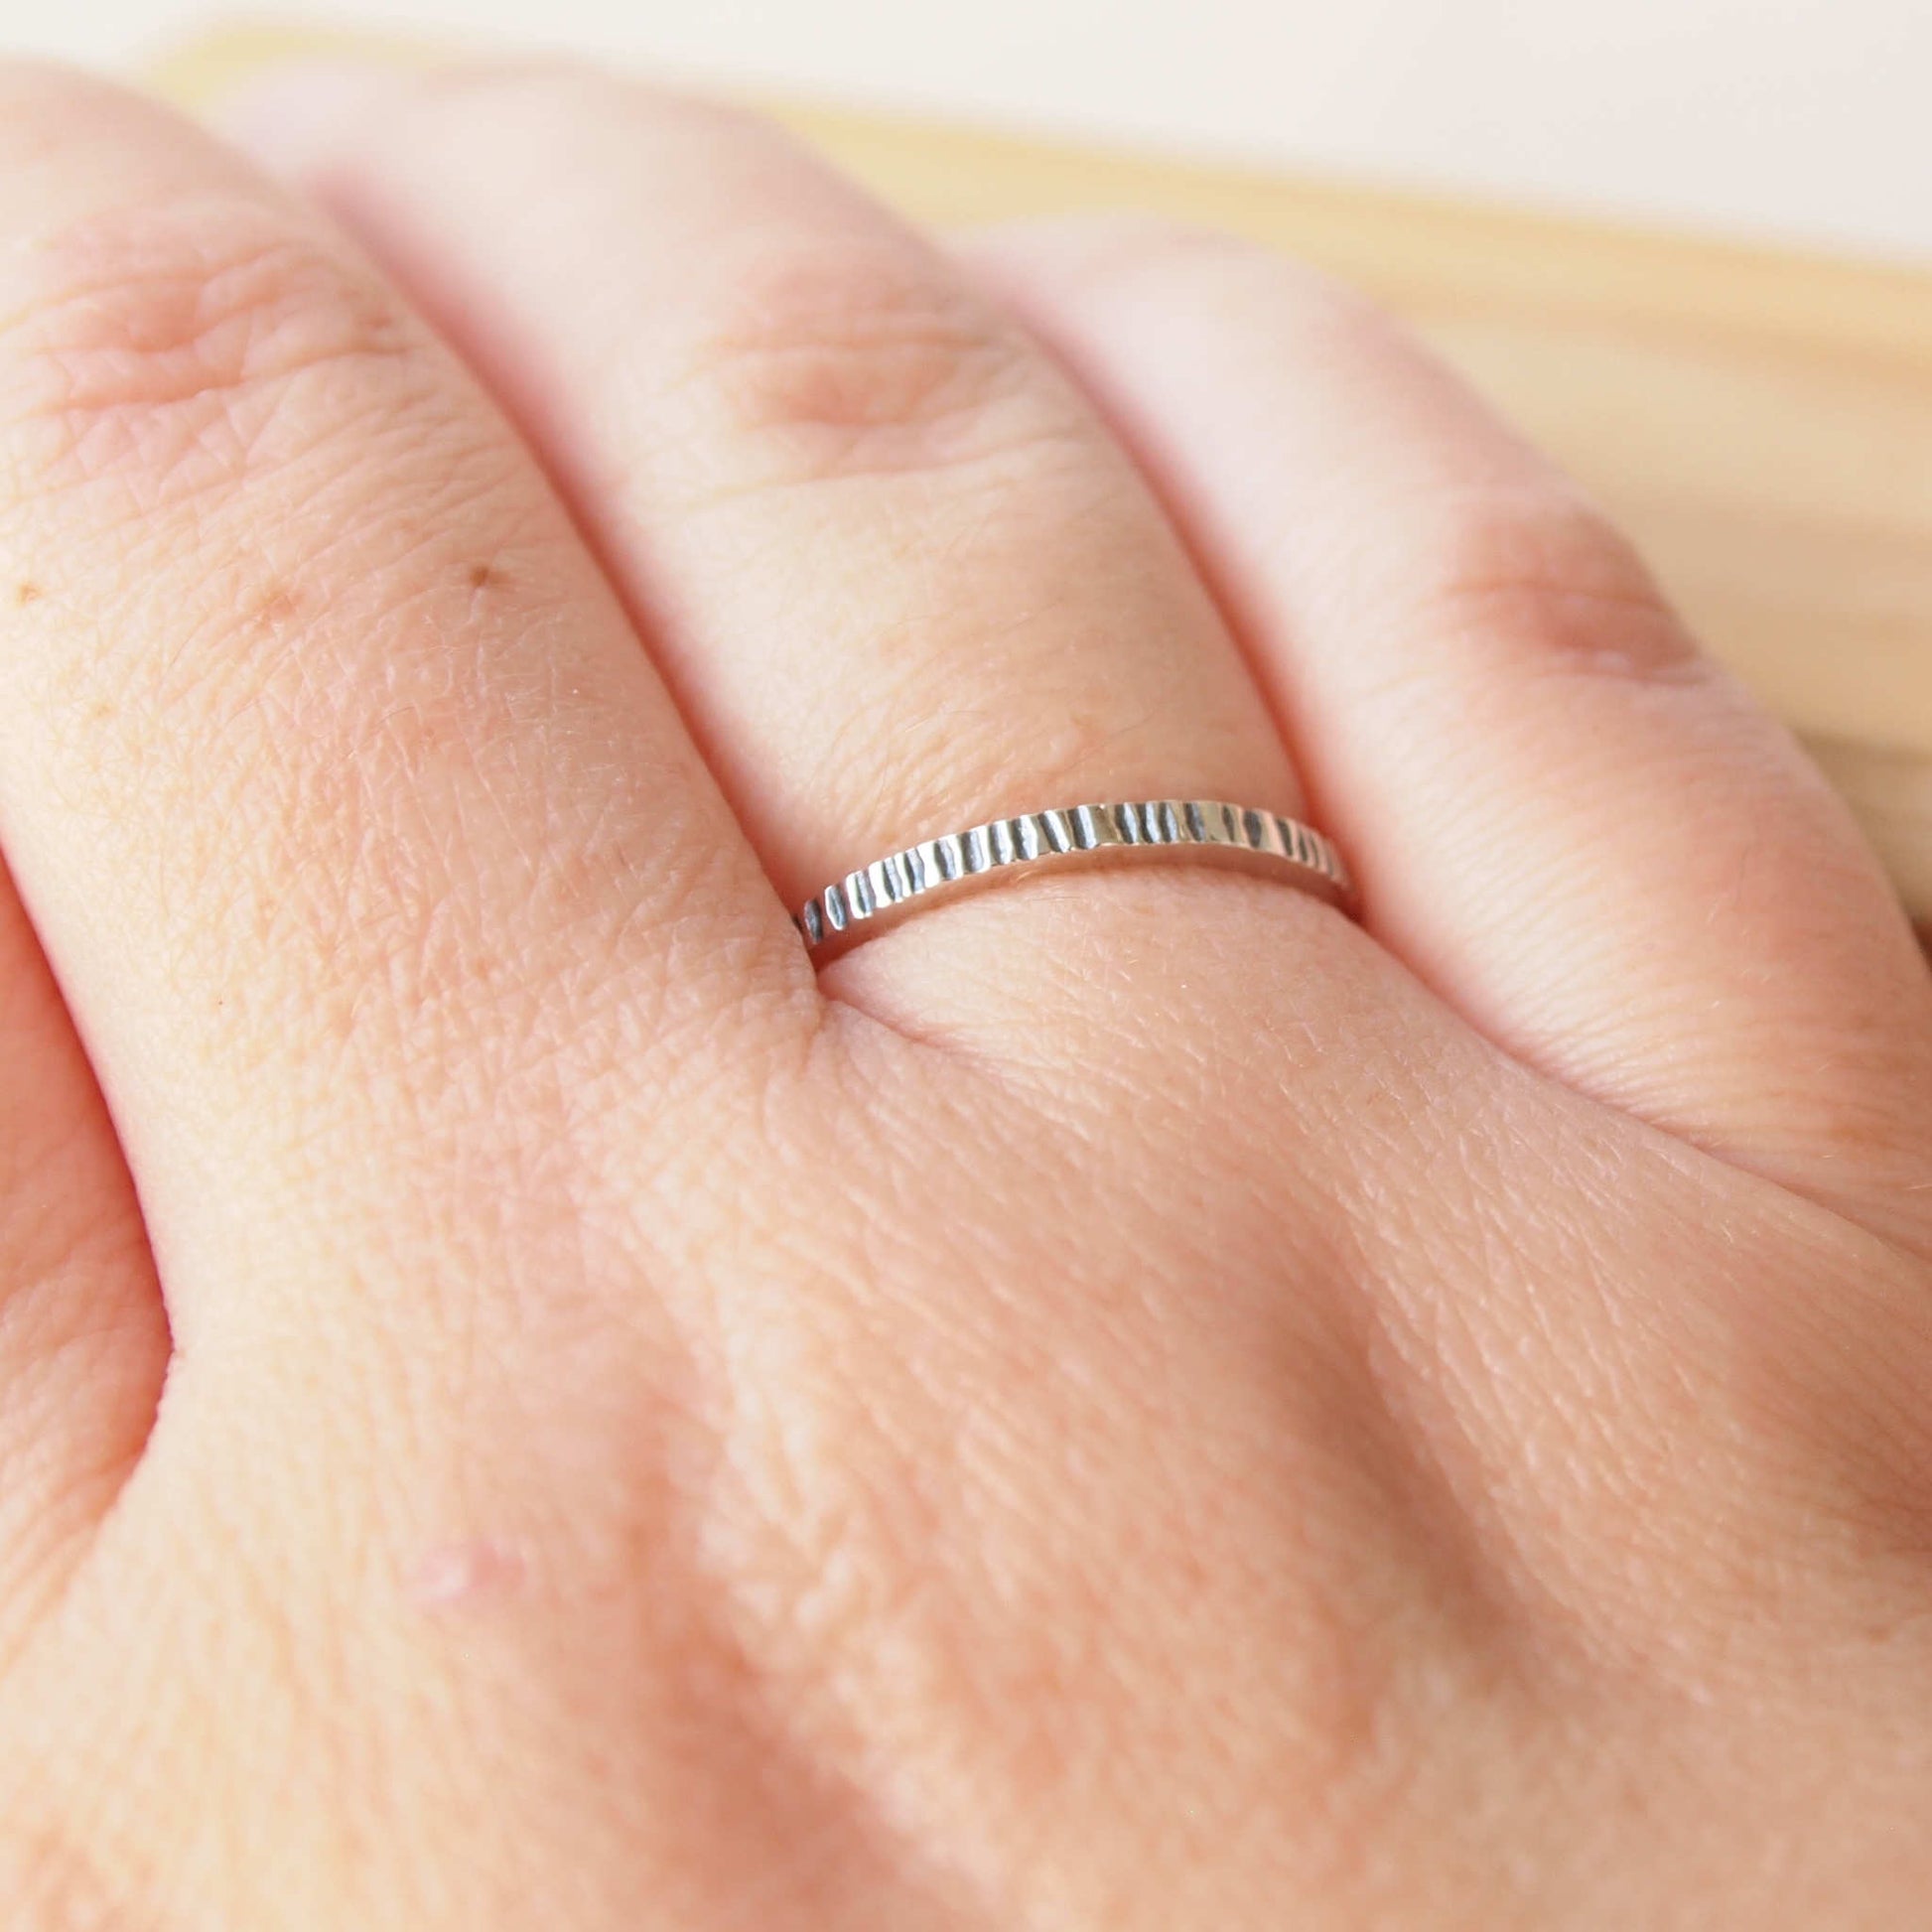 Silver plain band ring with lines pattern. ideal for stacking with other rings. Handmade in Scotland by maram jewellery